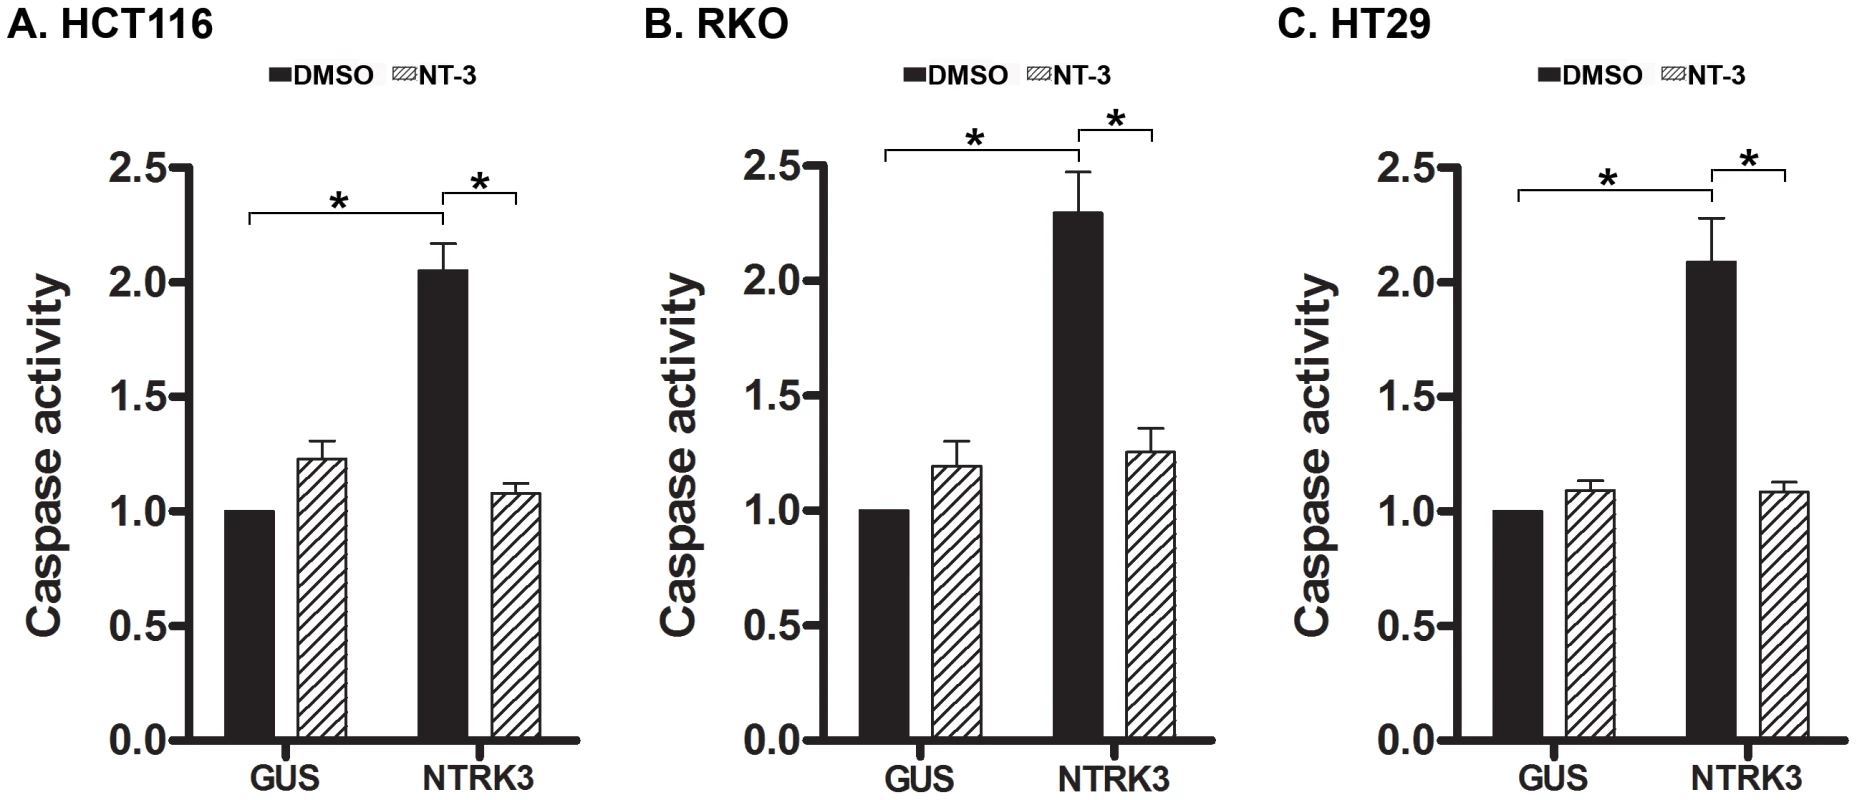 Assessment of normalized caspase 3 and 7 activity after reconstitution of <i>NTRK3</i> in HCT116 (A), RKO (B) and HT29 (C) cells.